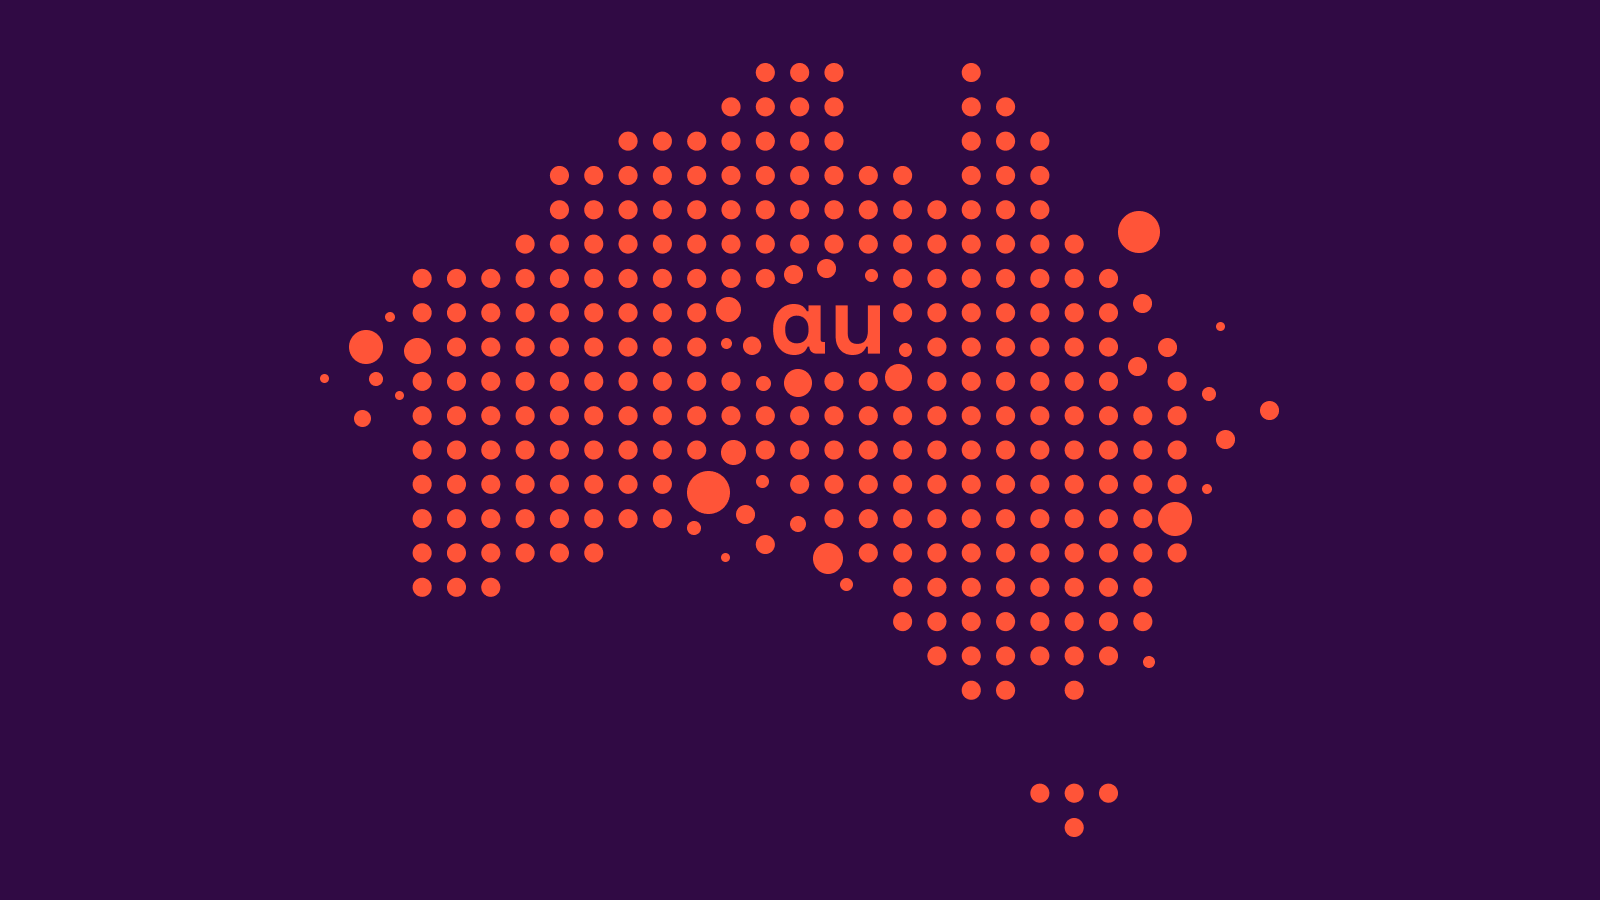 Map of Australia made up of dots with the letters